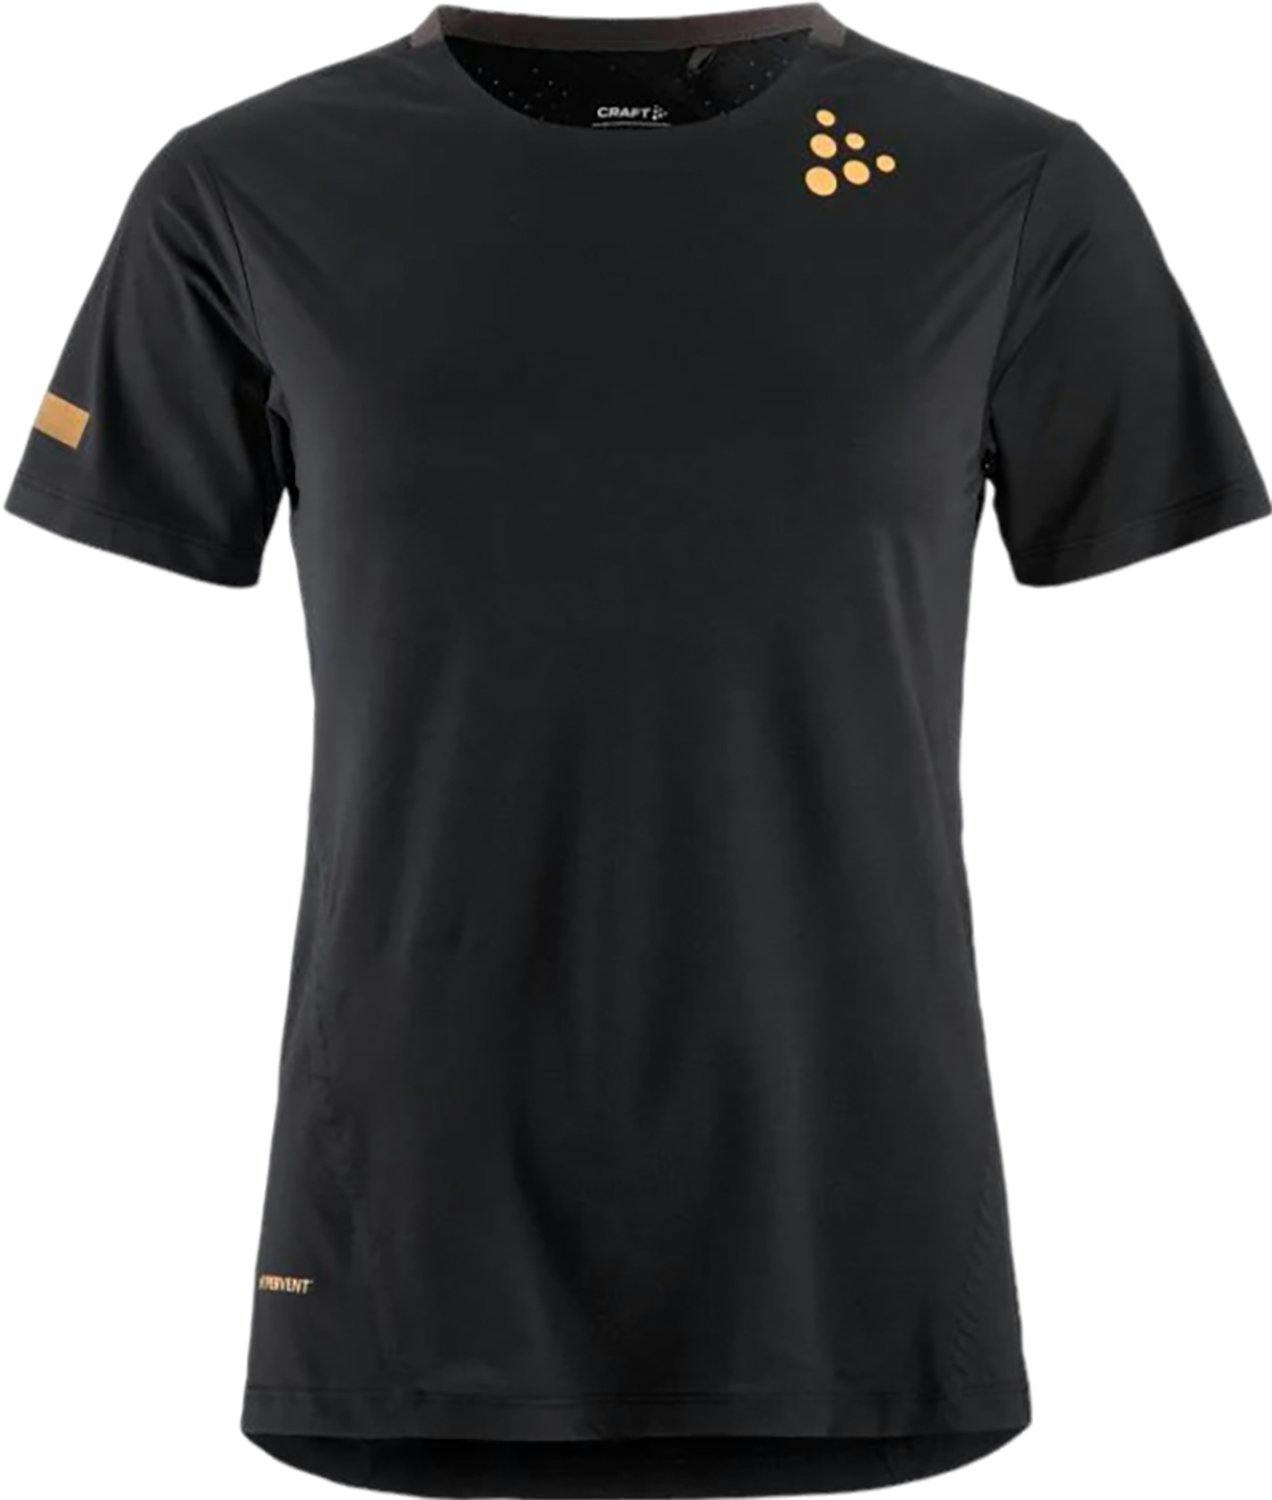 Product image for Pro Hypervent 2 T-Shirt - Women's